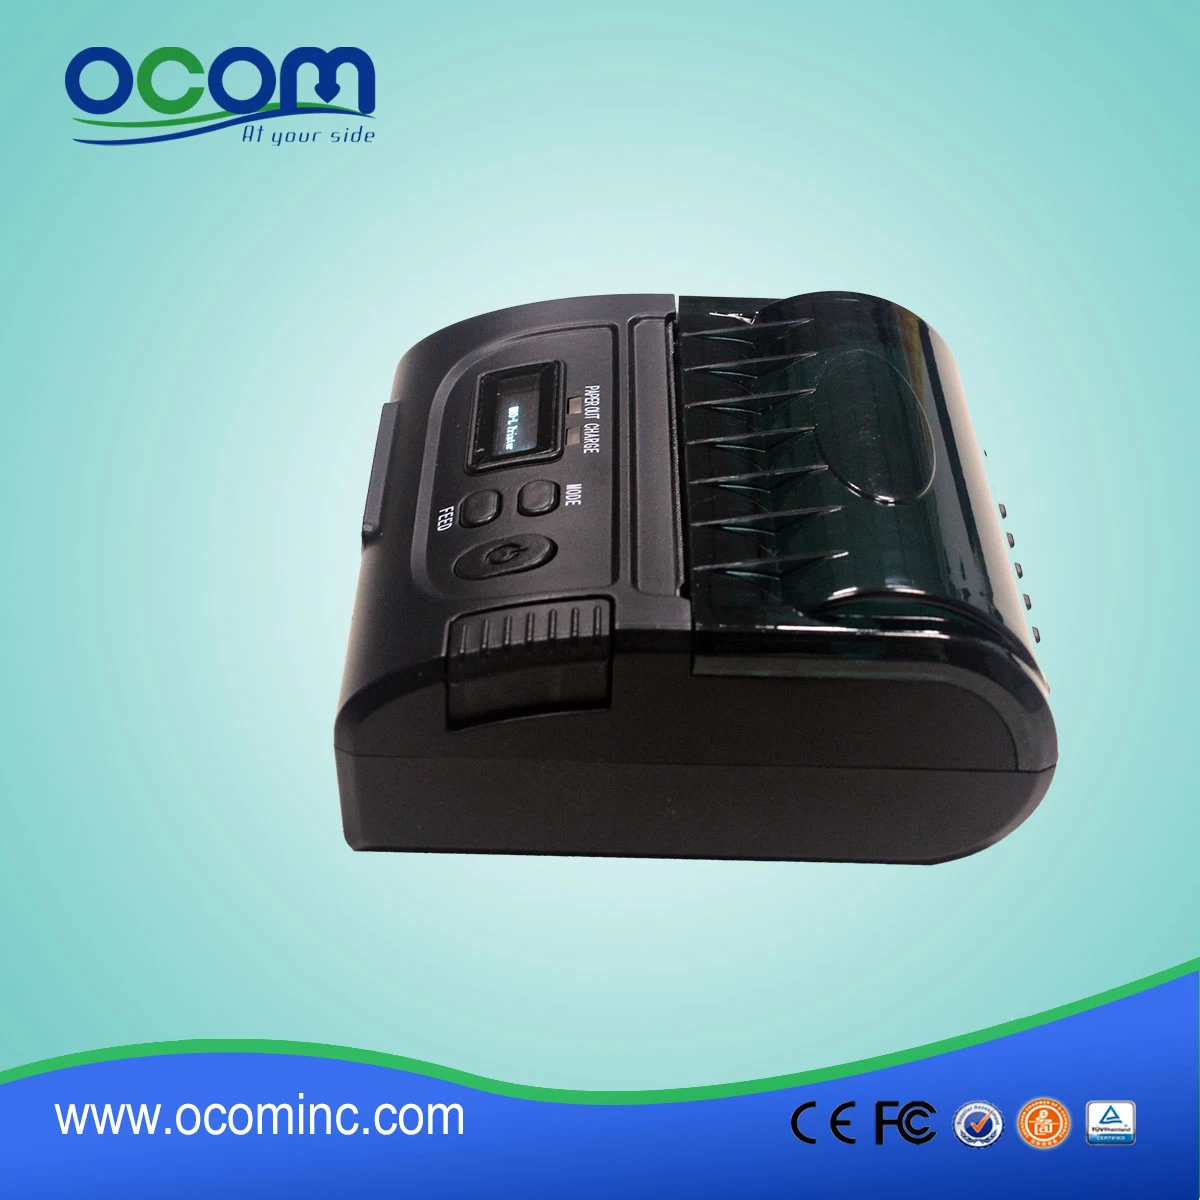 (OCPP-M083) 80mm Mini Portable Thermal Receipt Printer With OLED Display